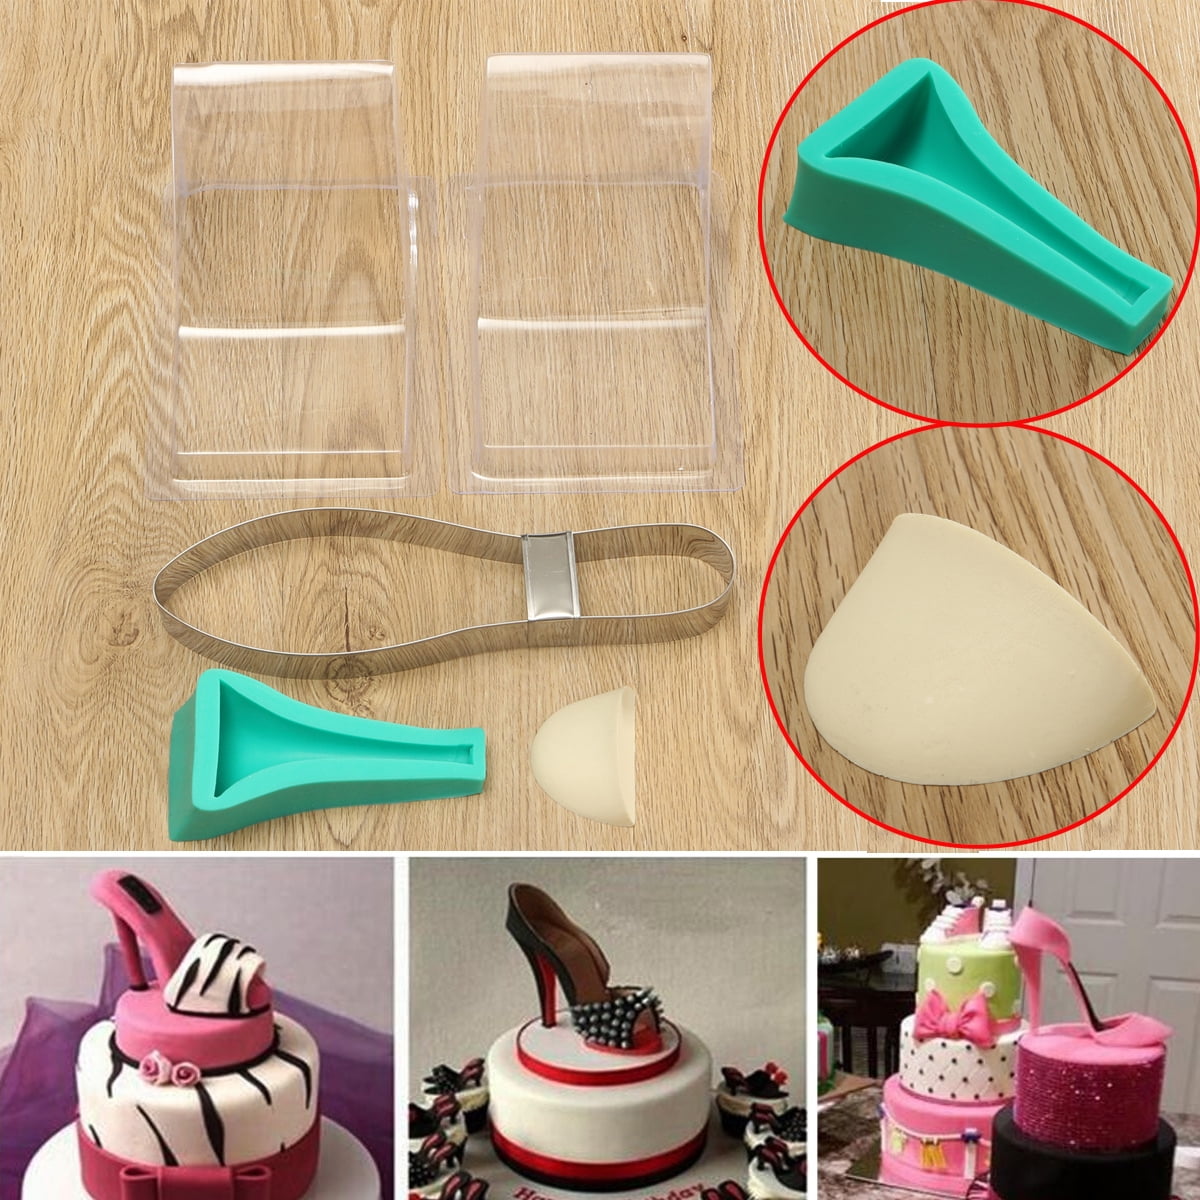 High Heel Shoe Kit Silicone Fondant CakeTemplate Mold Mould Decorating Party